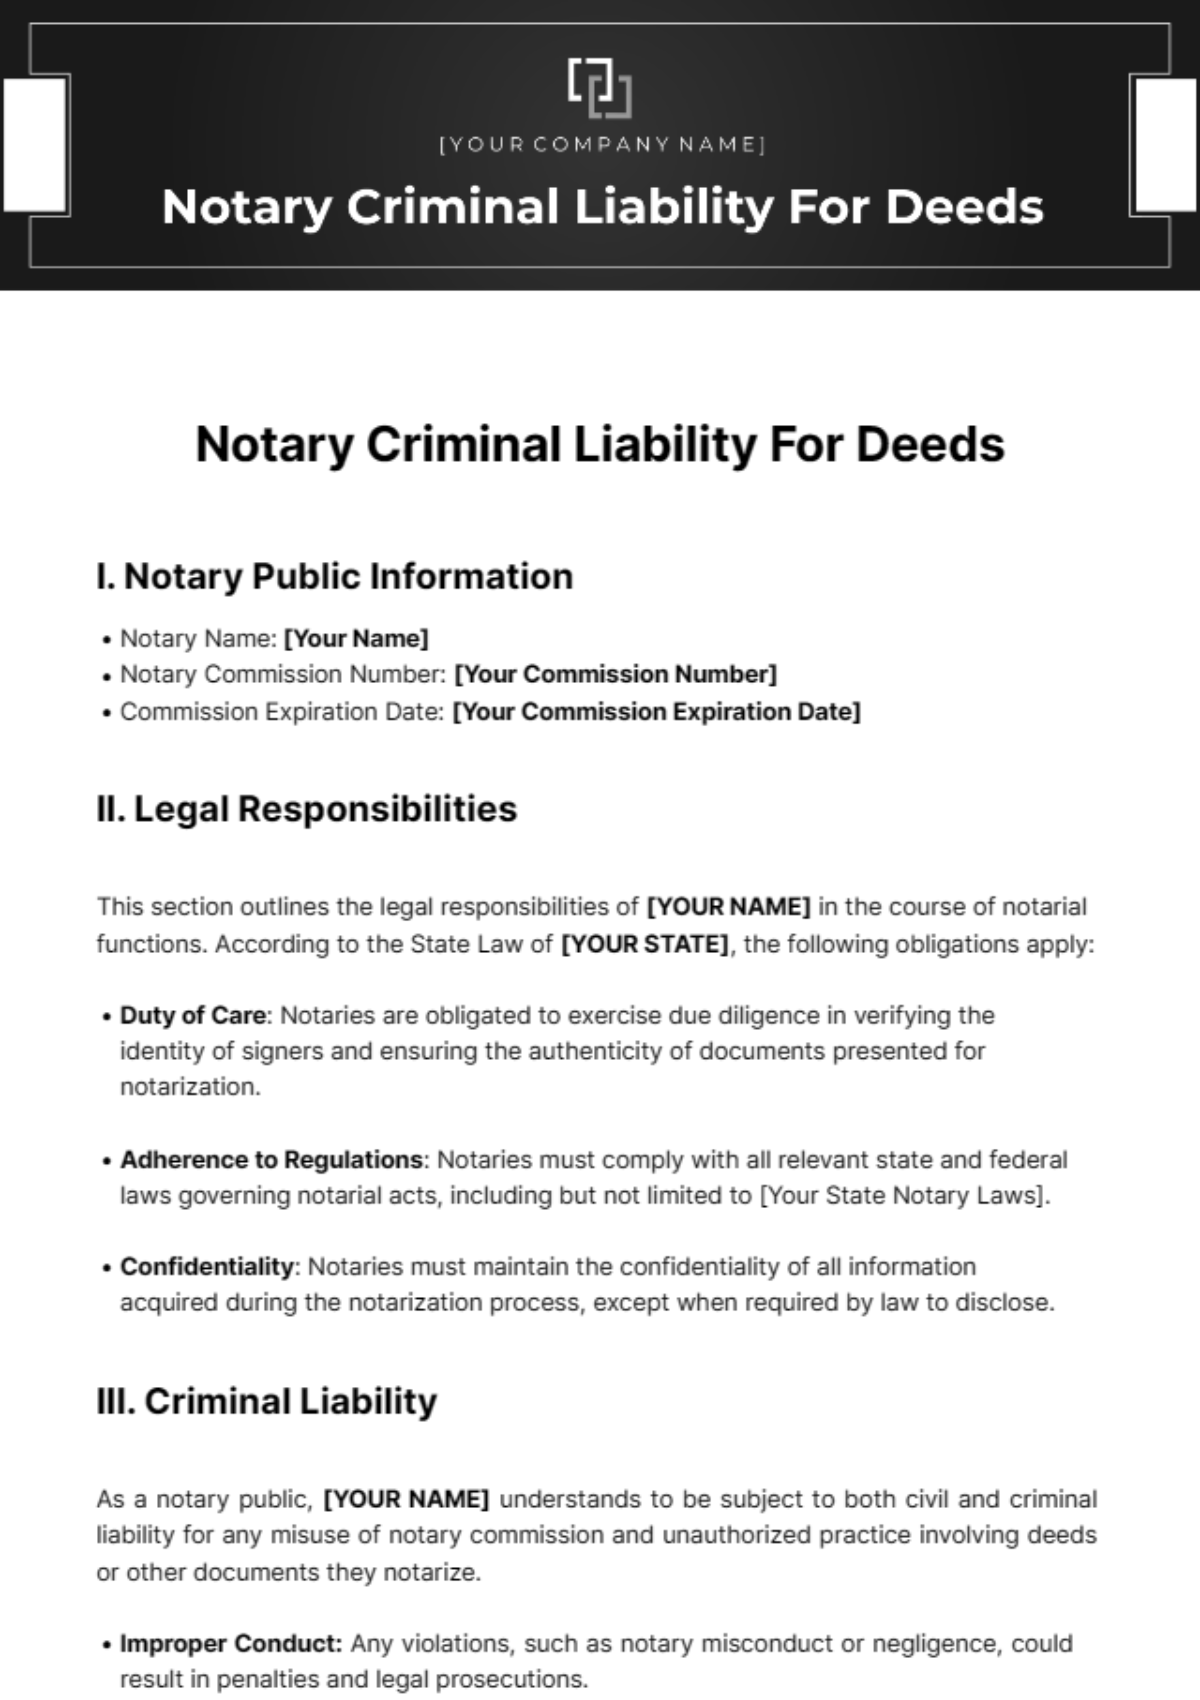 Free Notary Criminal Liability For Deeds Template